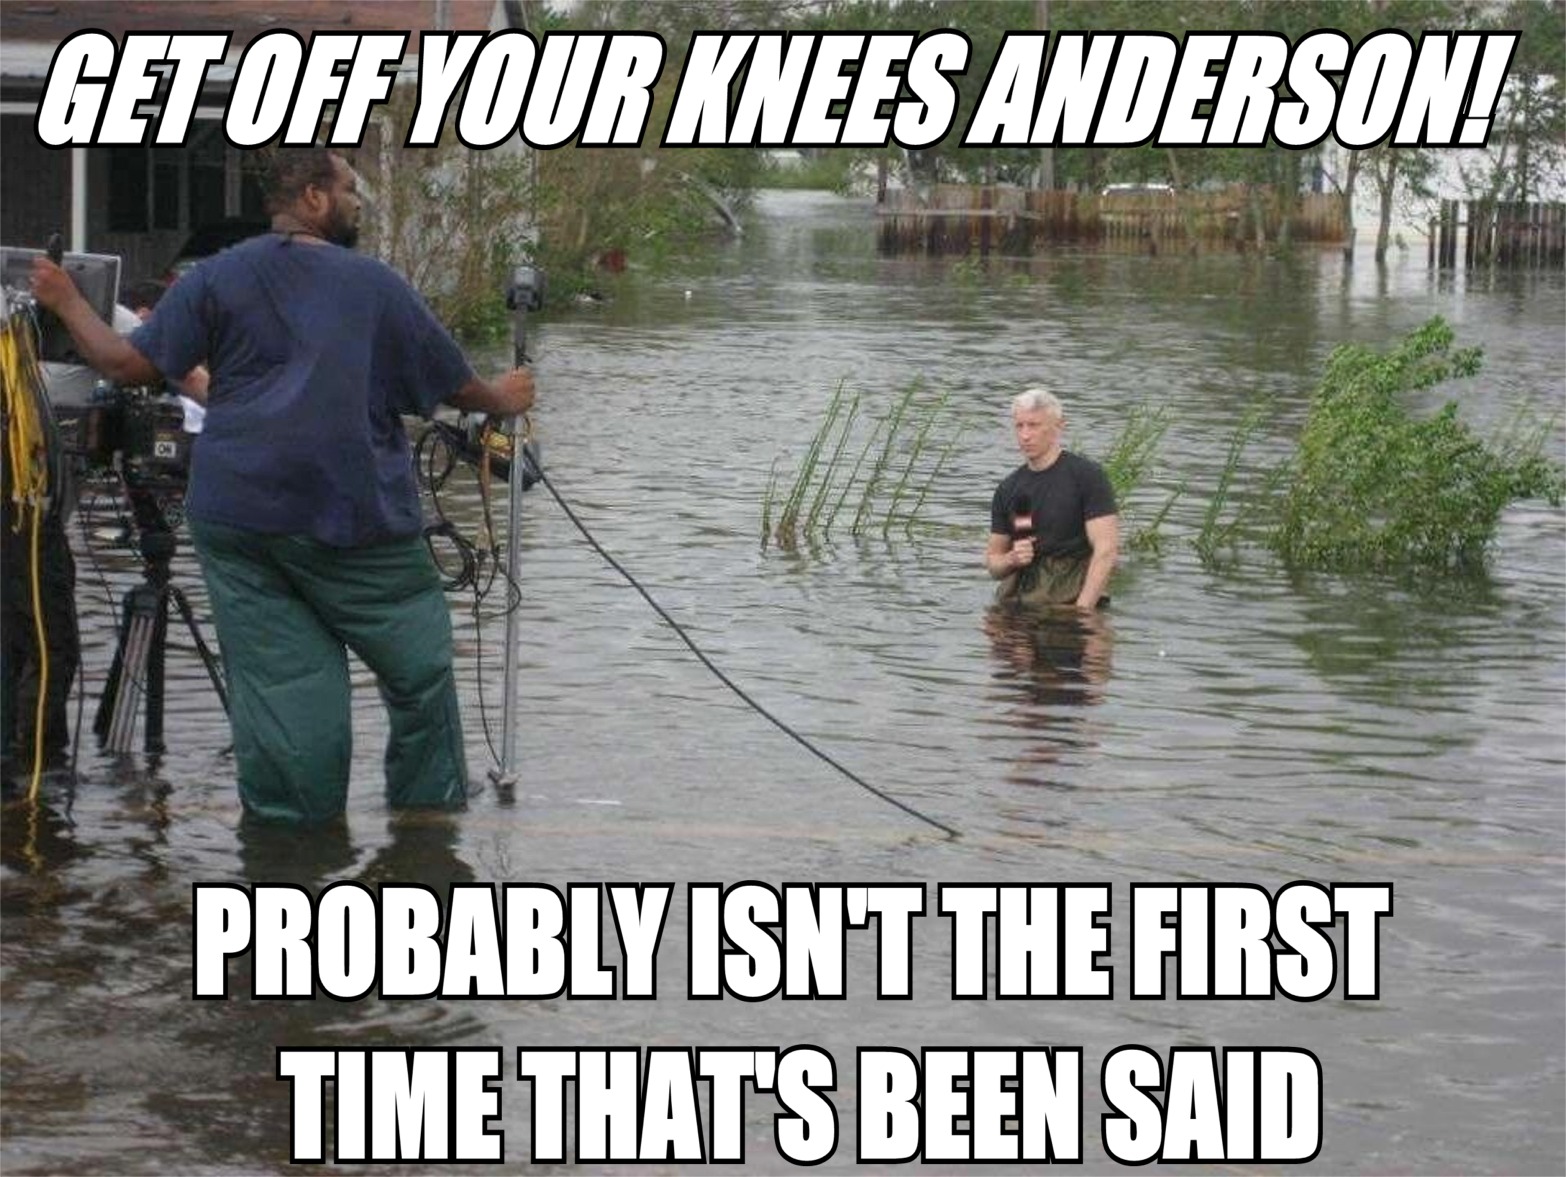 anderson cooper hurricane - Get Off Your Knees Andersoni Probably Isnt The First Time That'S Been Said